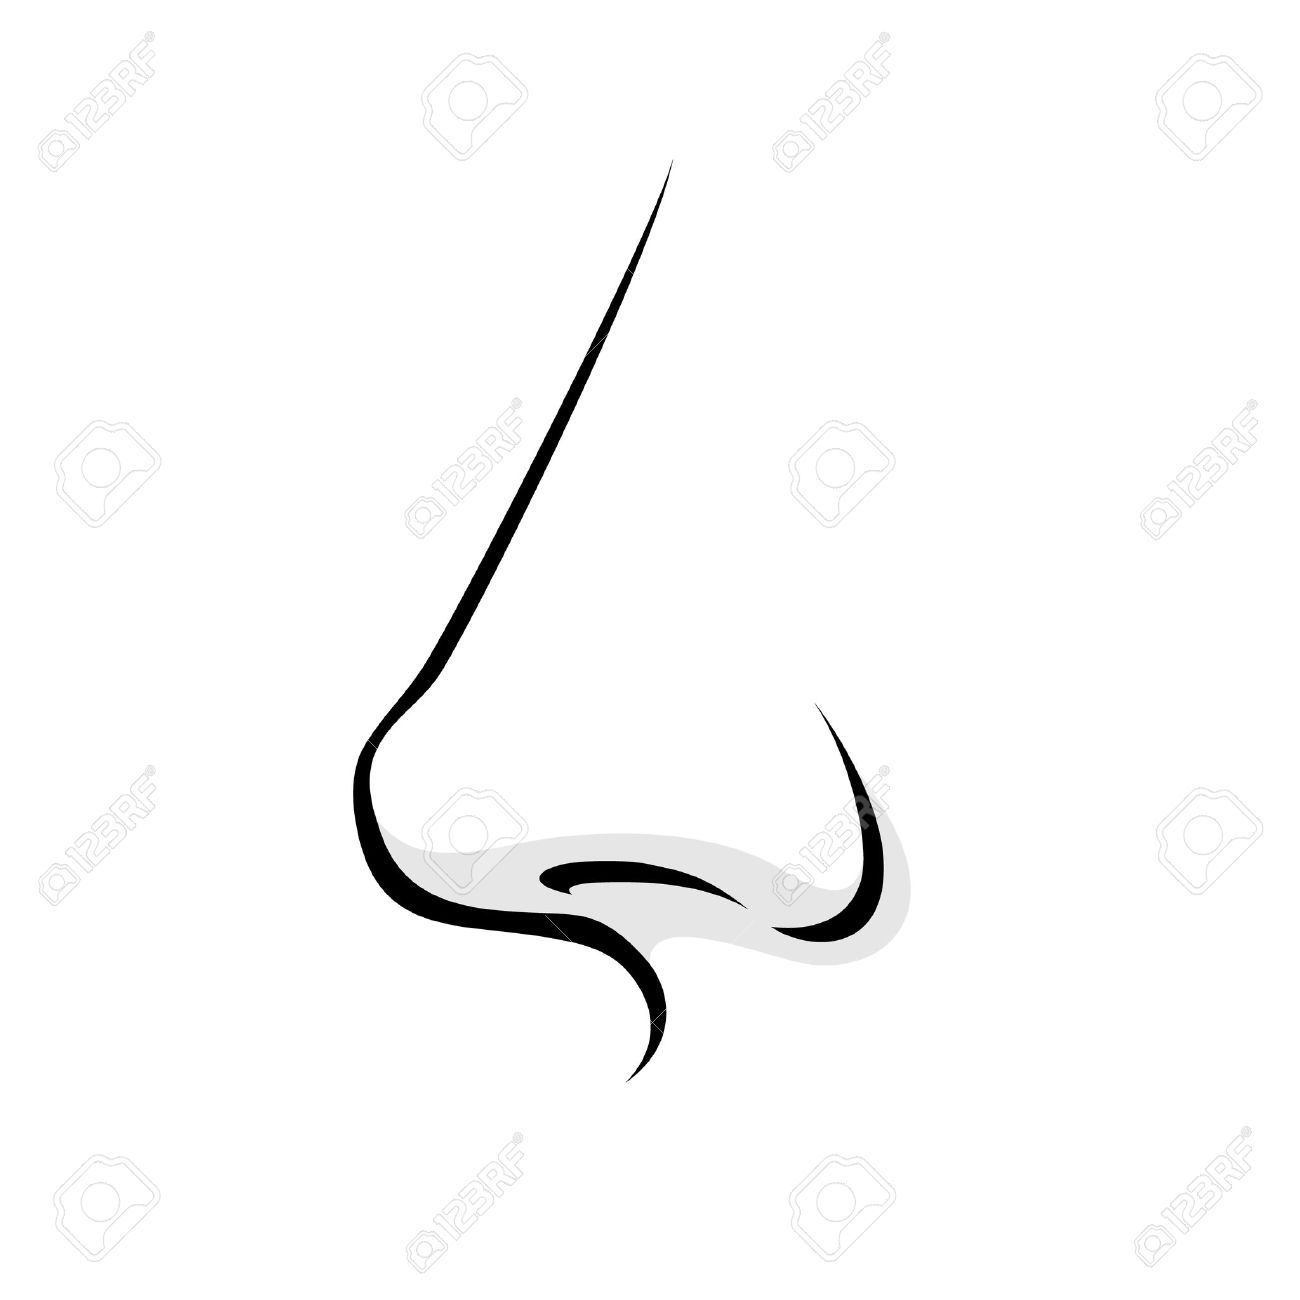 Human nose clipart black and white 7 » Clipart Station.